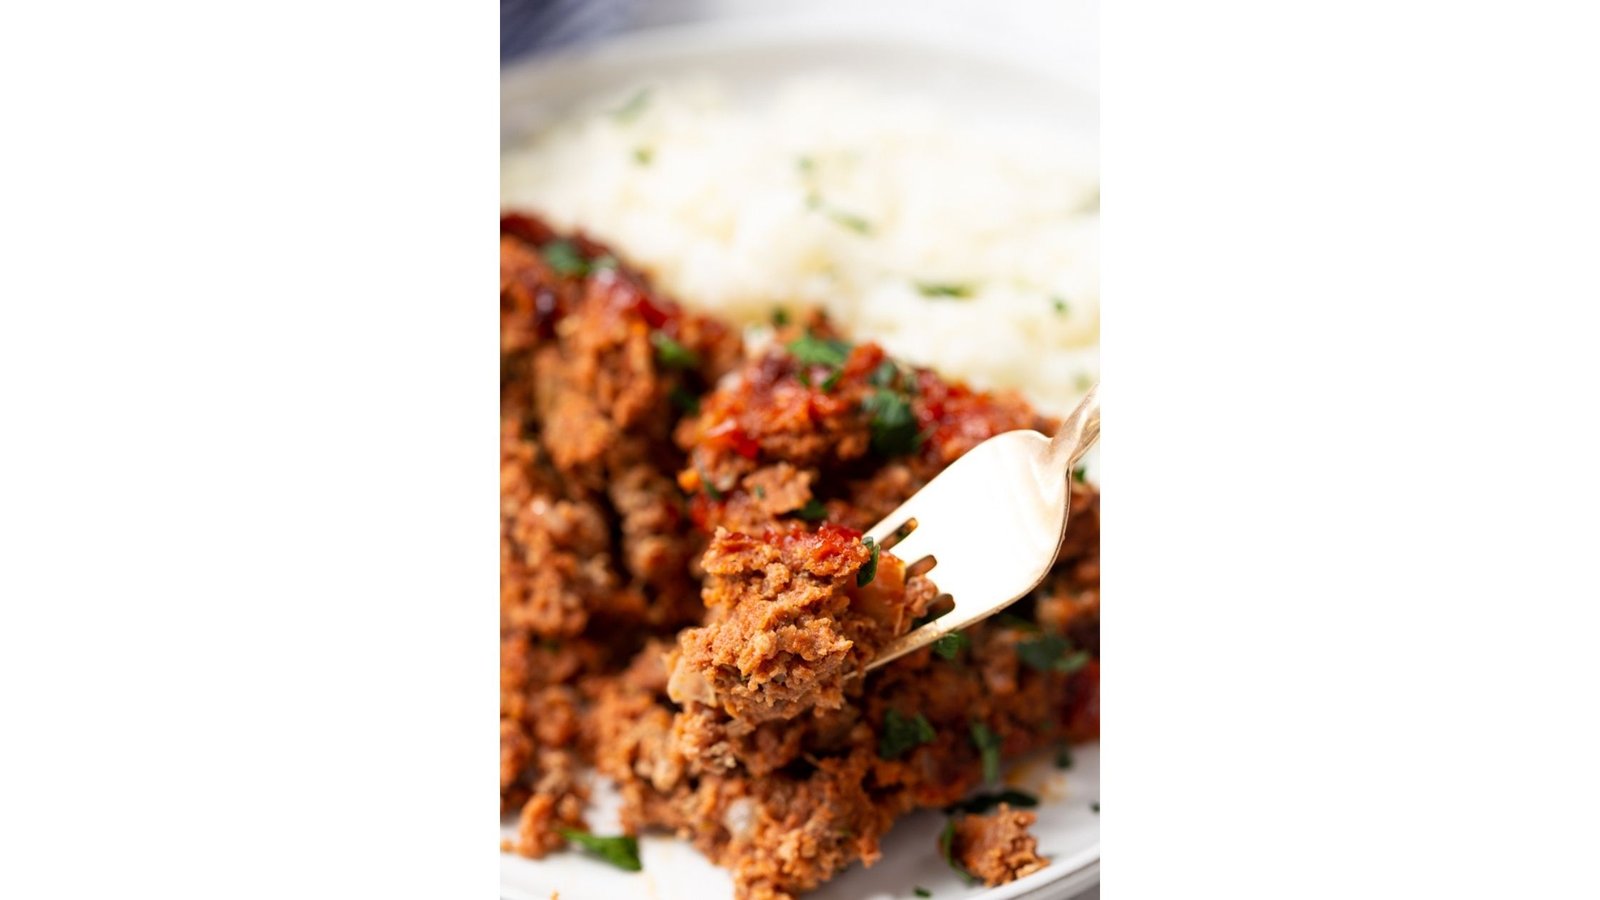 The Keto Meatloaf from The Eazy Peazy Mealz